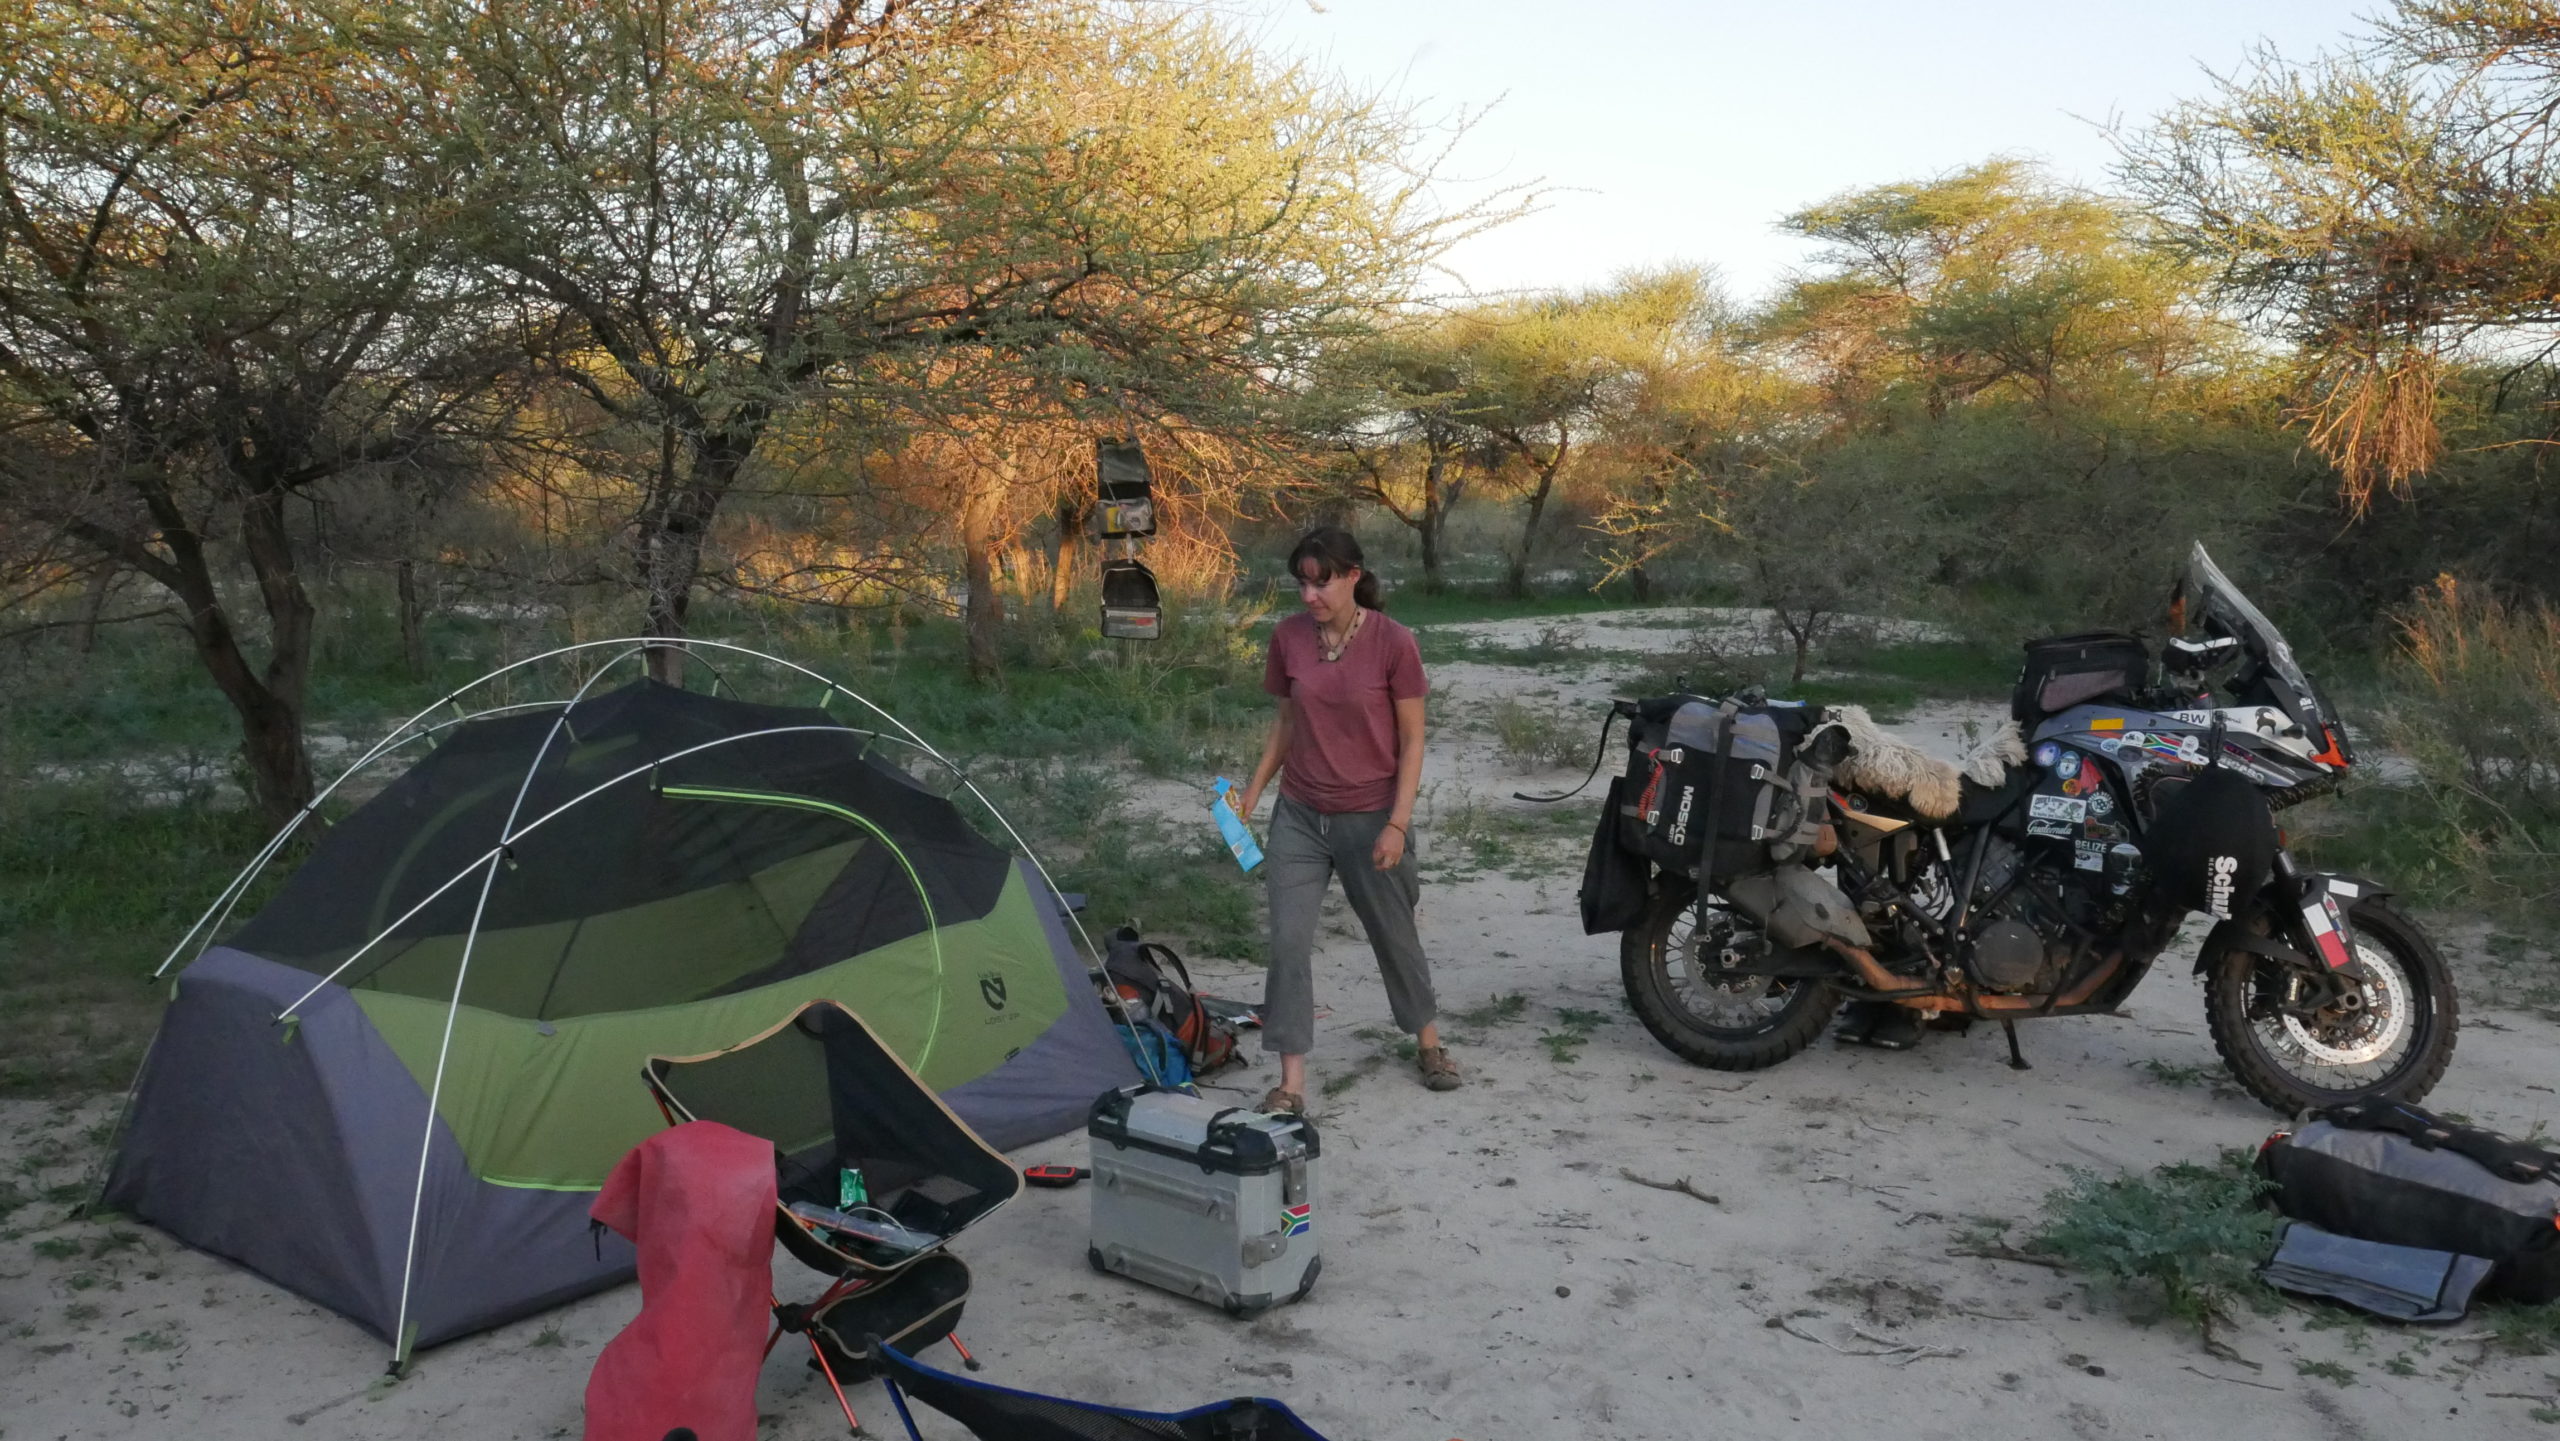 Marisa walks from a motorcycle parked in the sand to a tent set up nearby. 